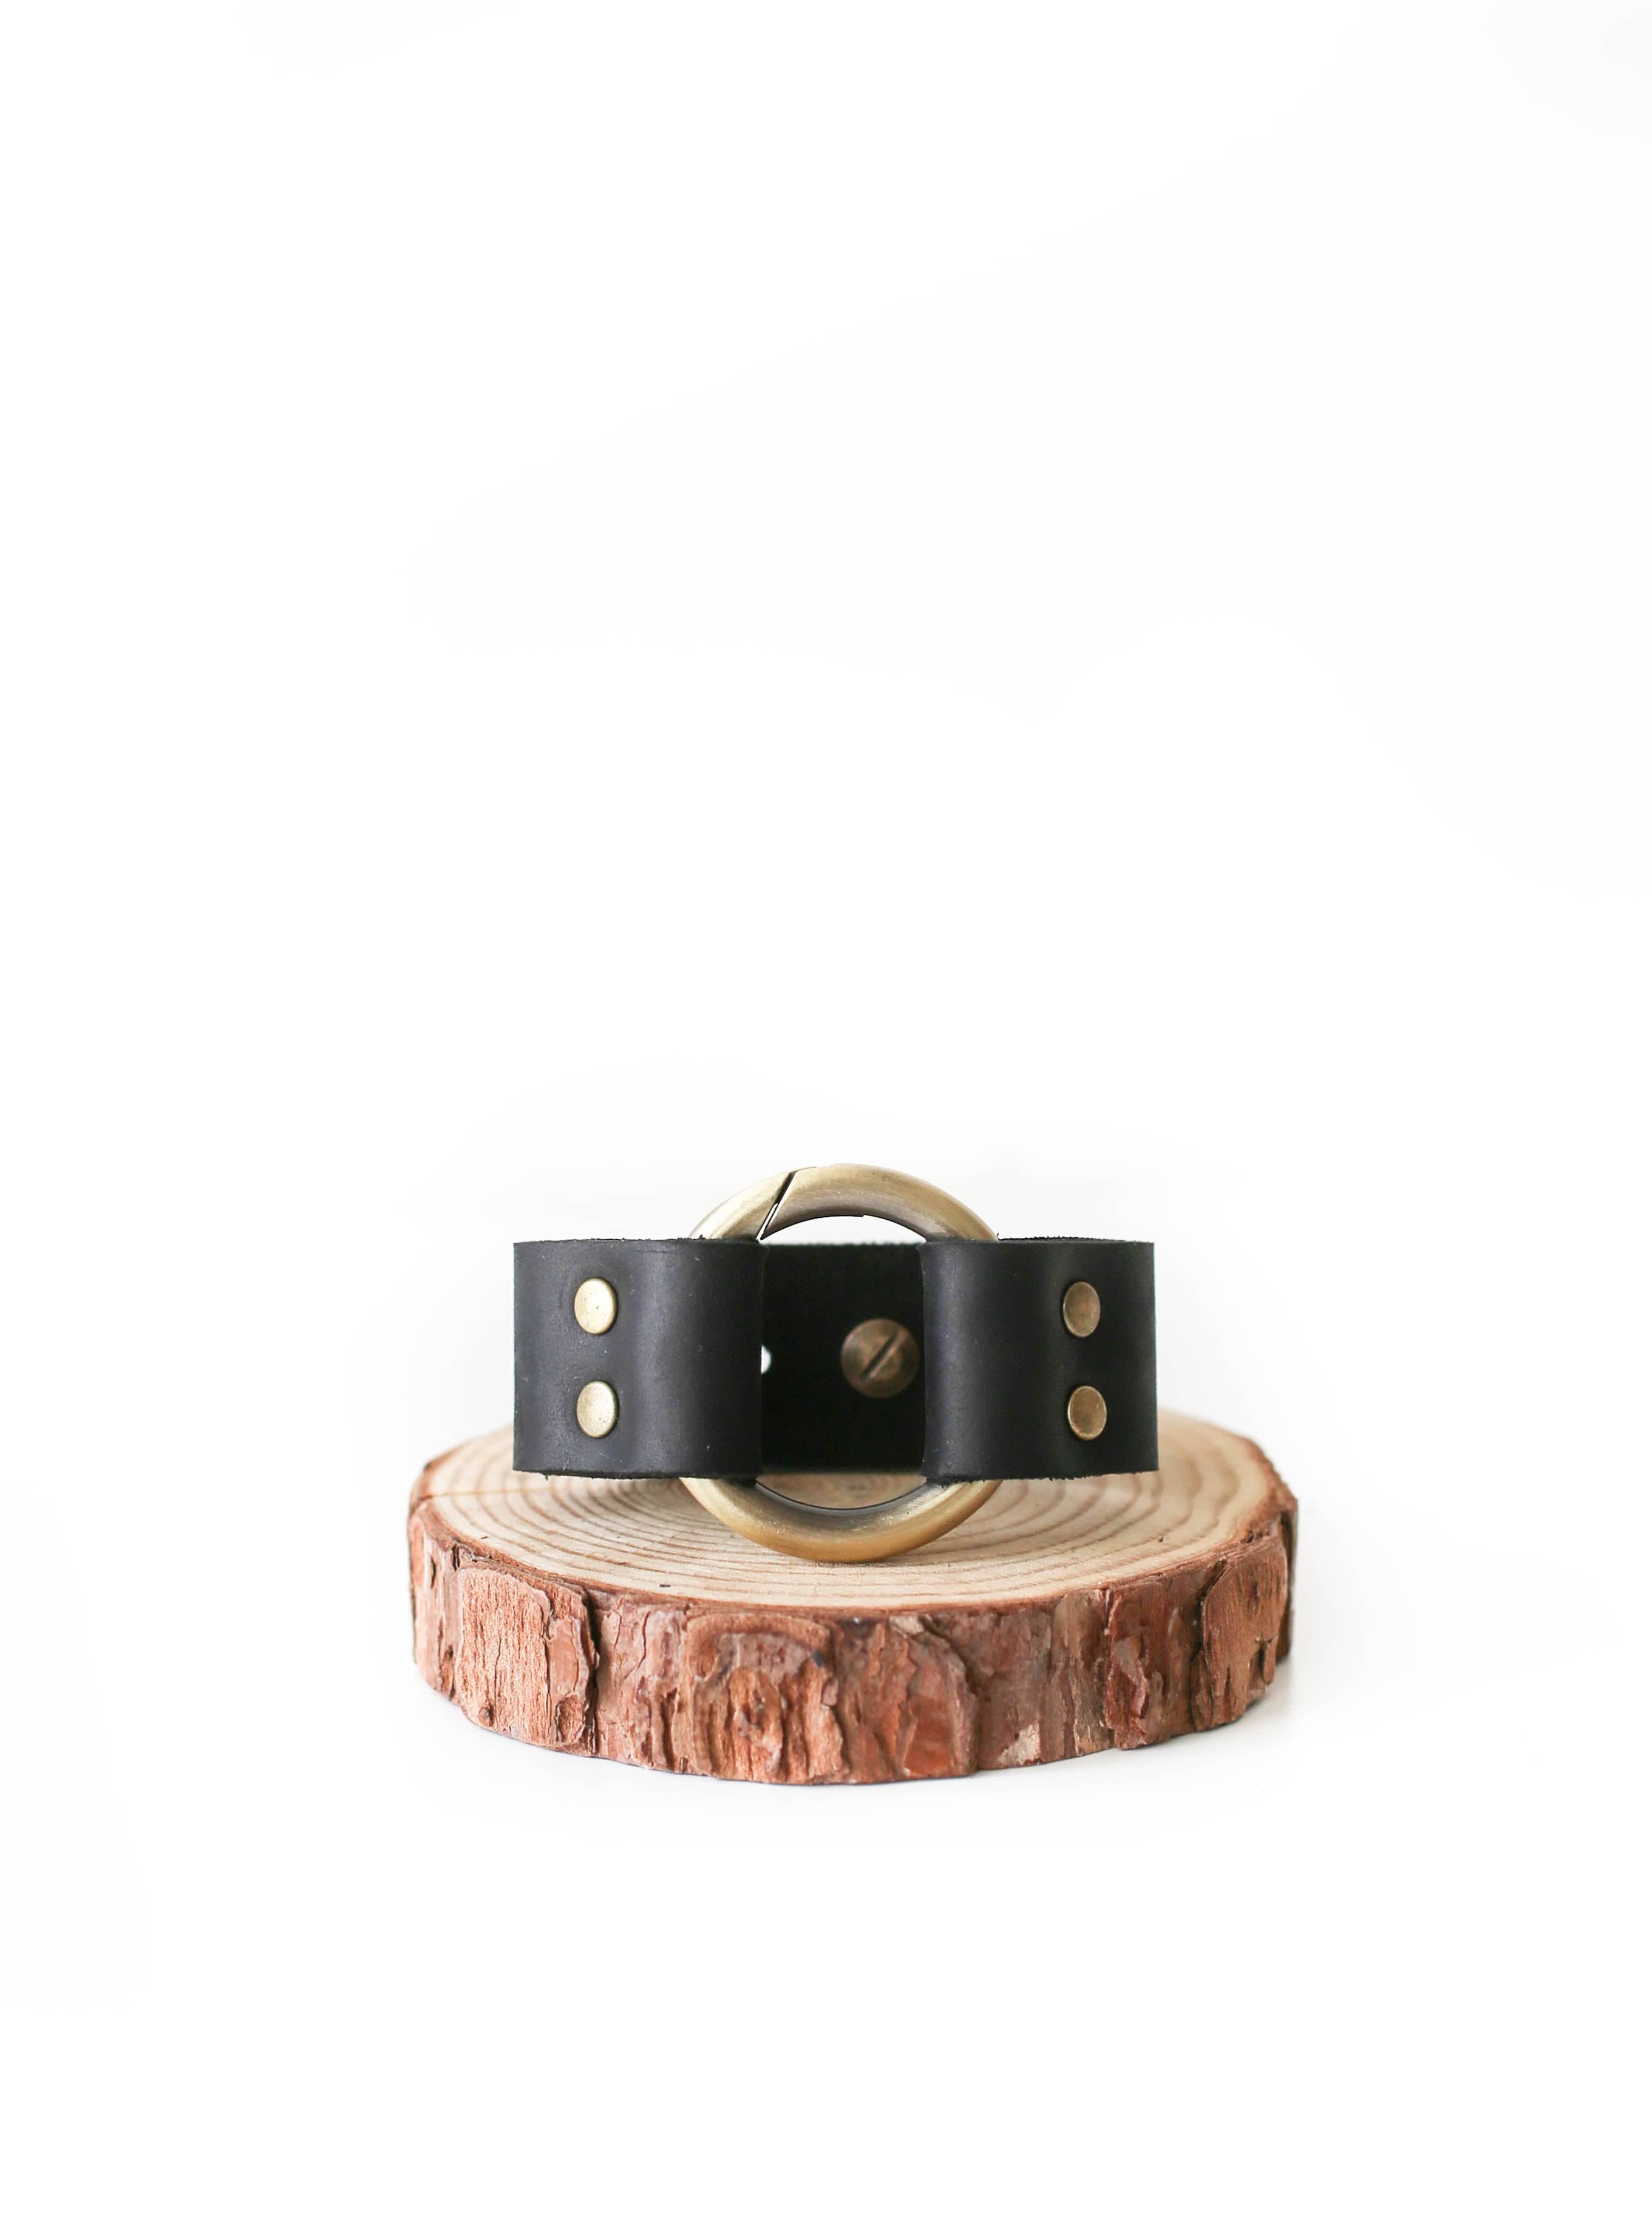 Stainless Steel Cuff Bracelet with Black Leather | Edgy Jewelry